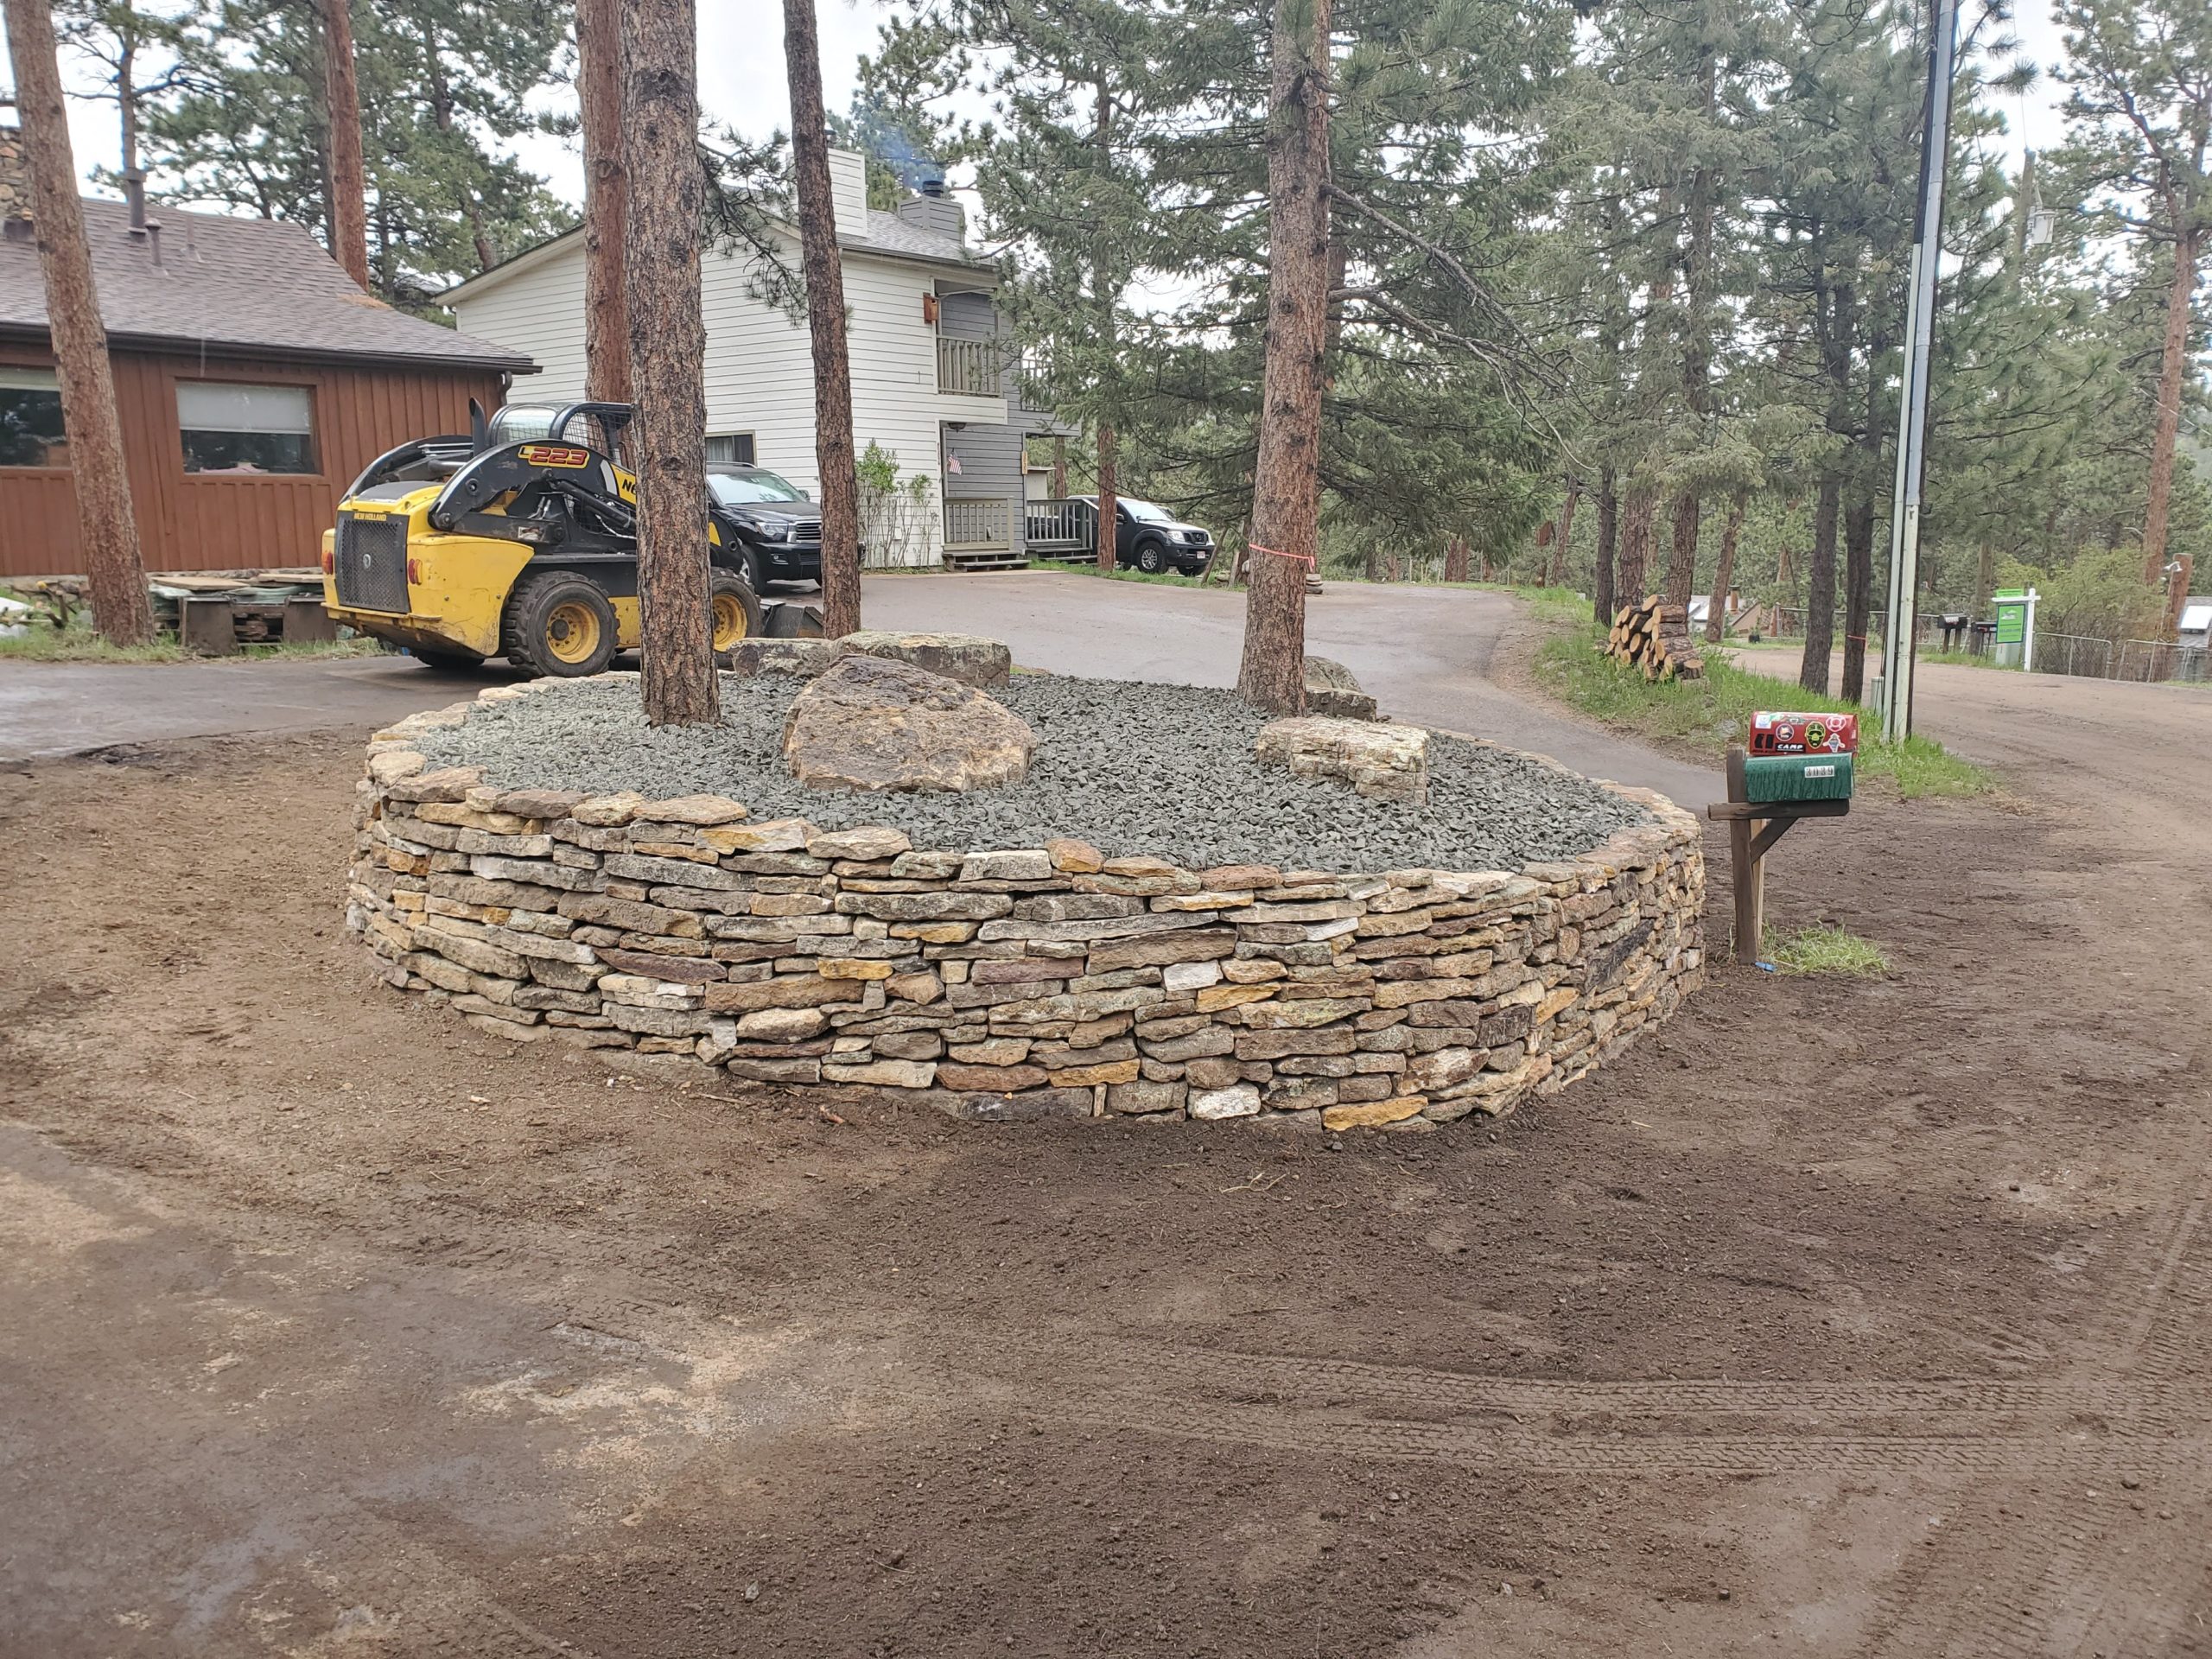 Circular retaining wall with three pine trees in the center.